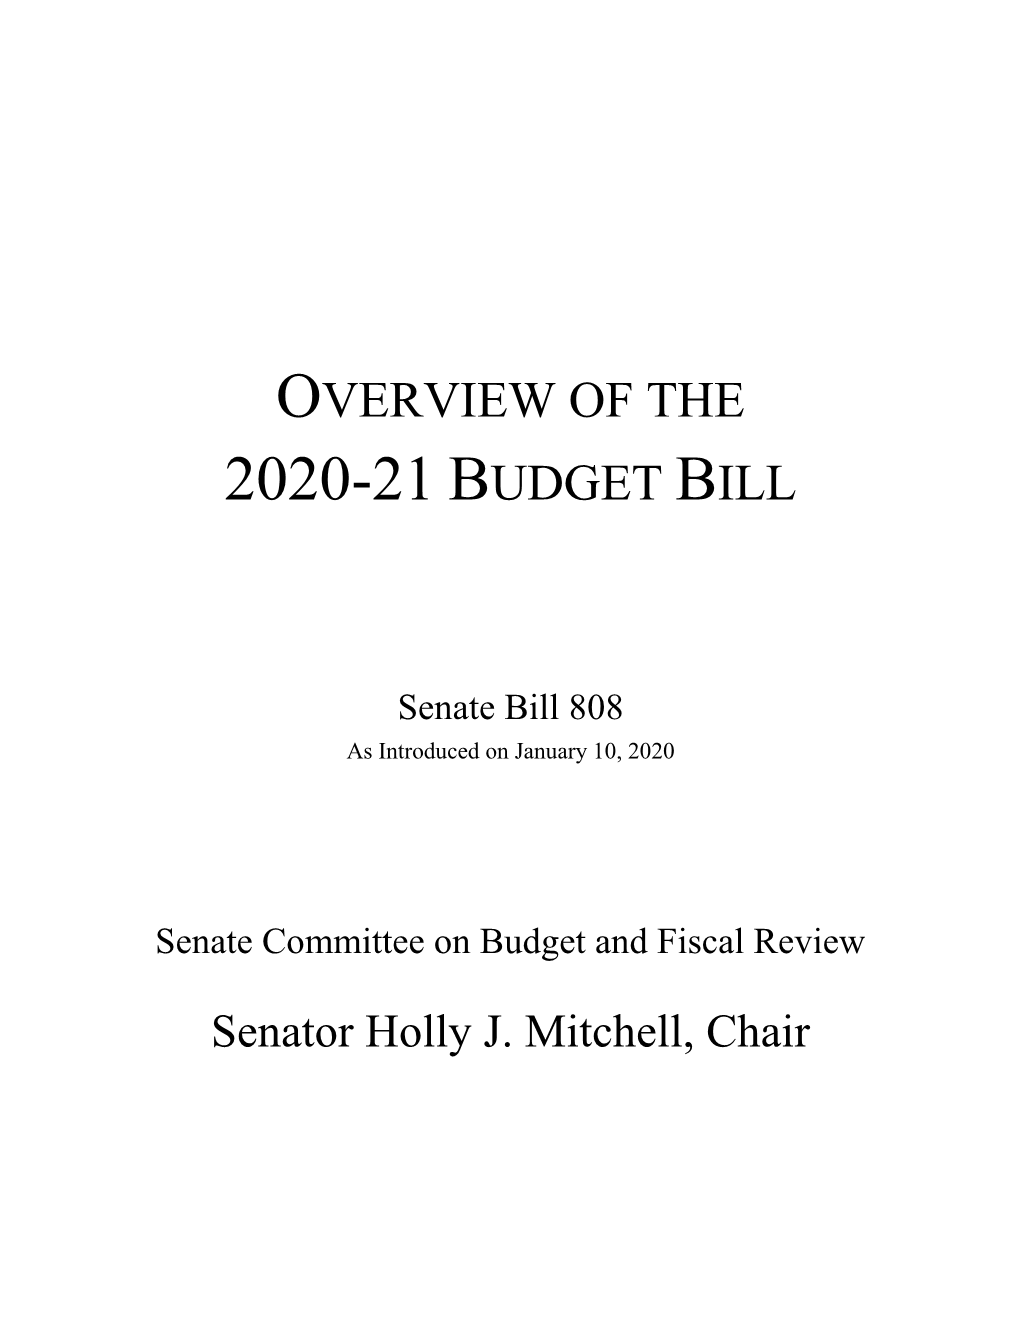 Overview of the 2020-21 Budget Bill